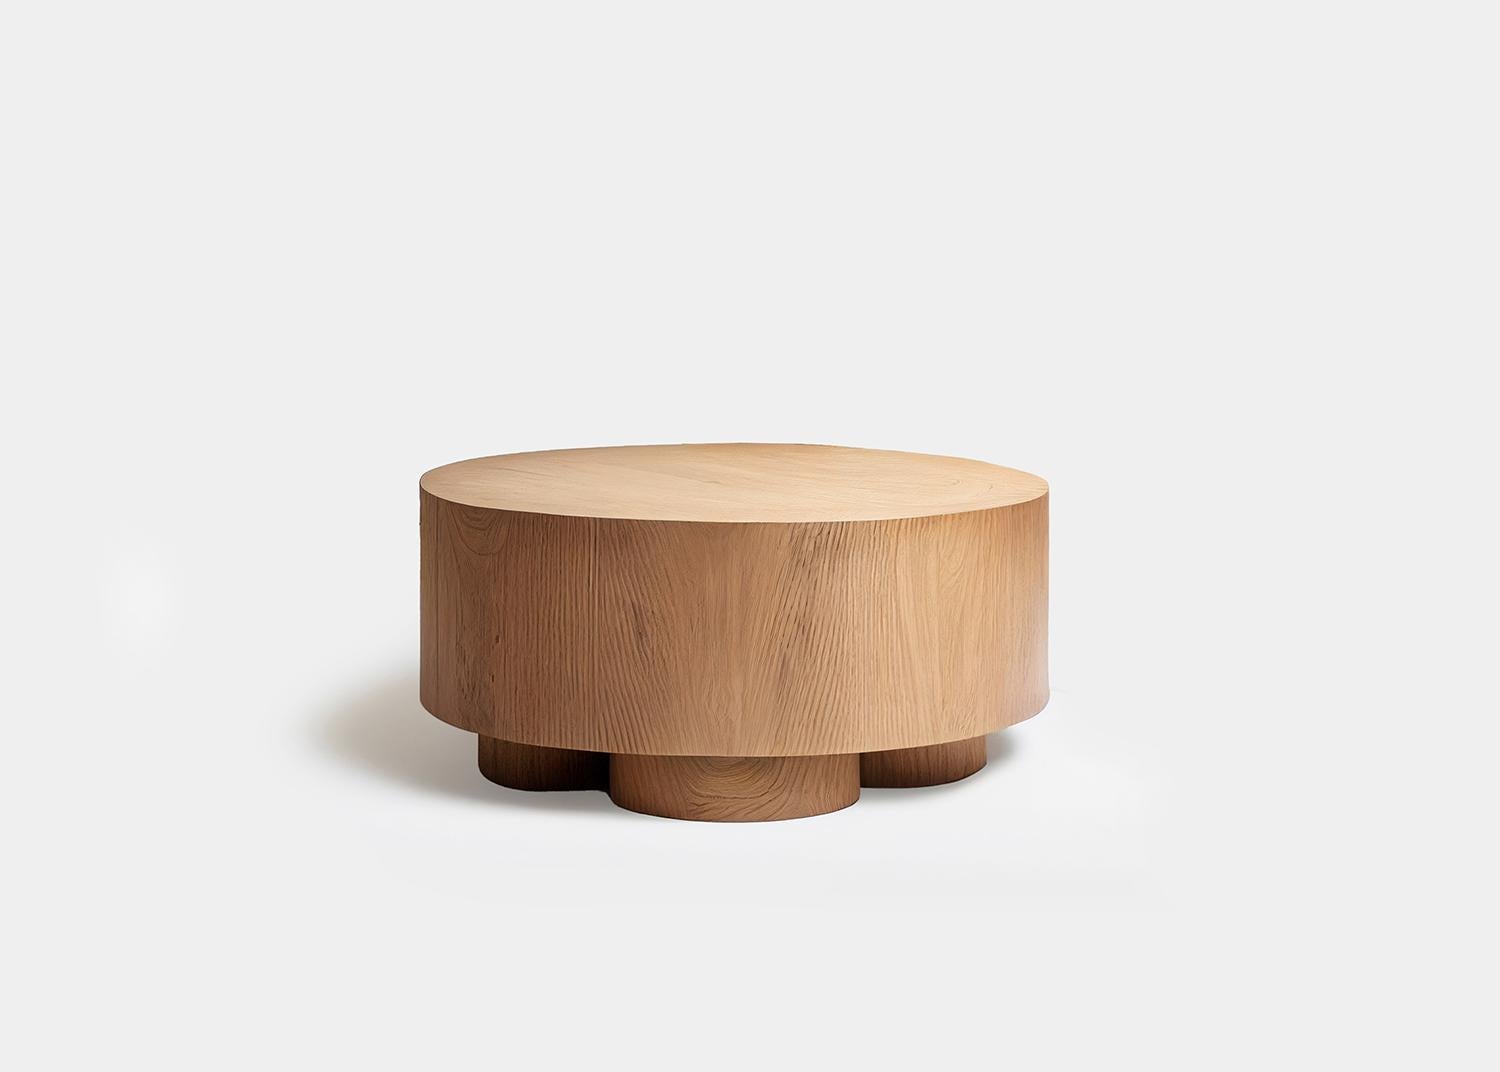 Brutalist Round Coffee Table in Red Oak Wood Veneer, Podio by NONO For Sale 3